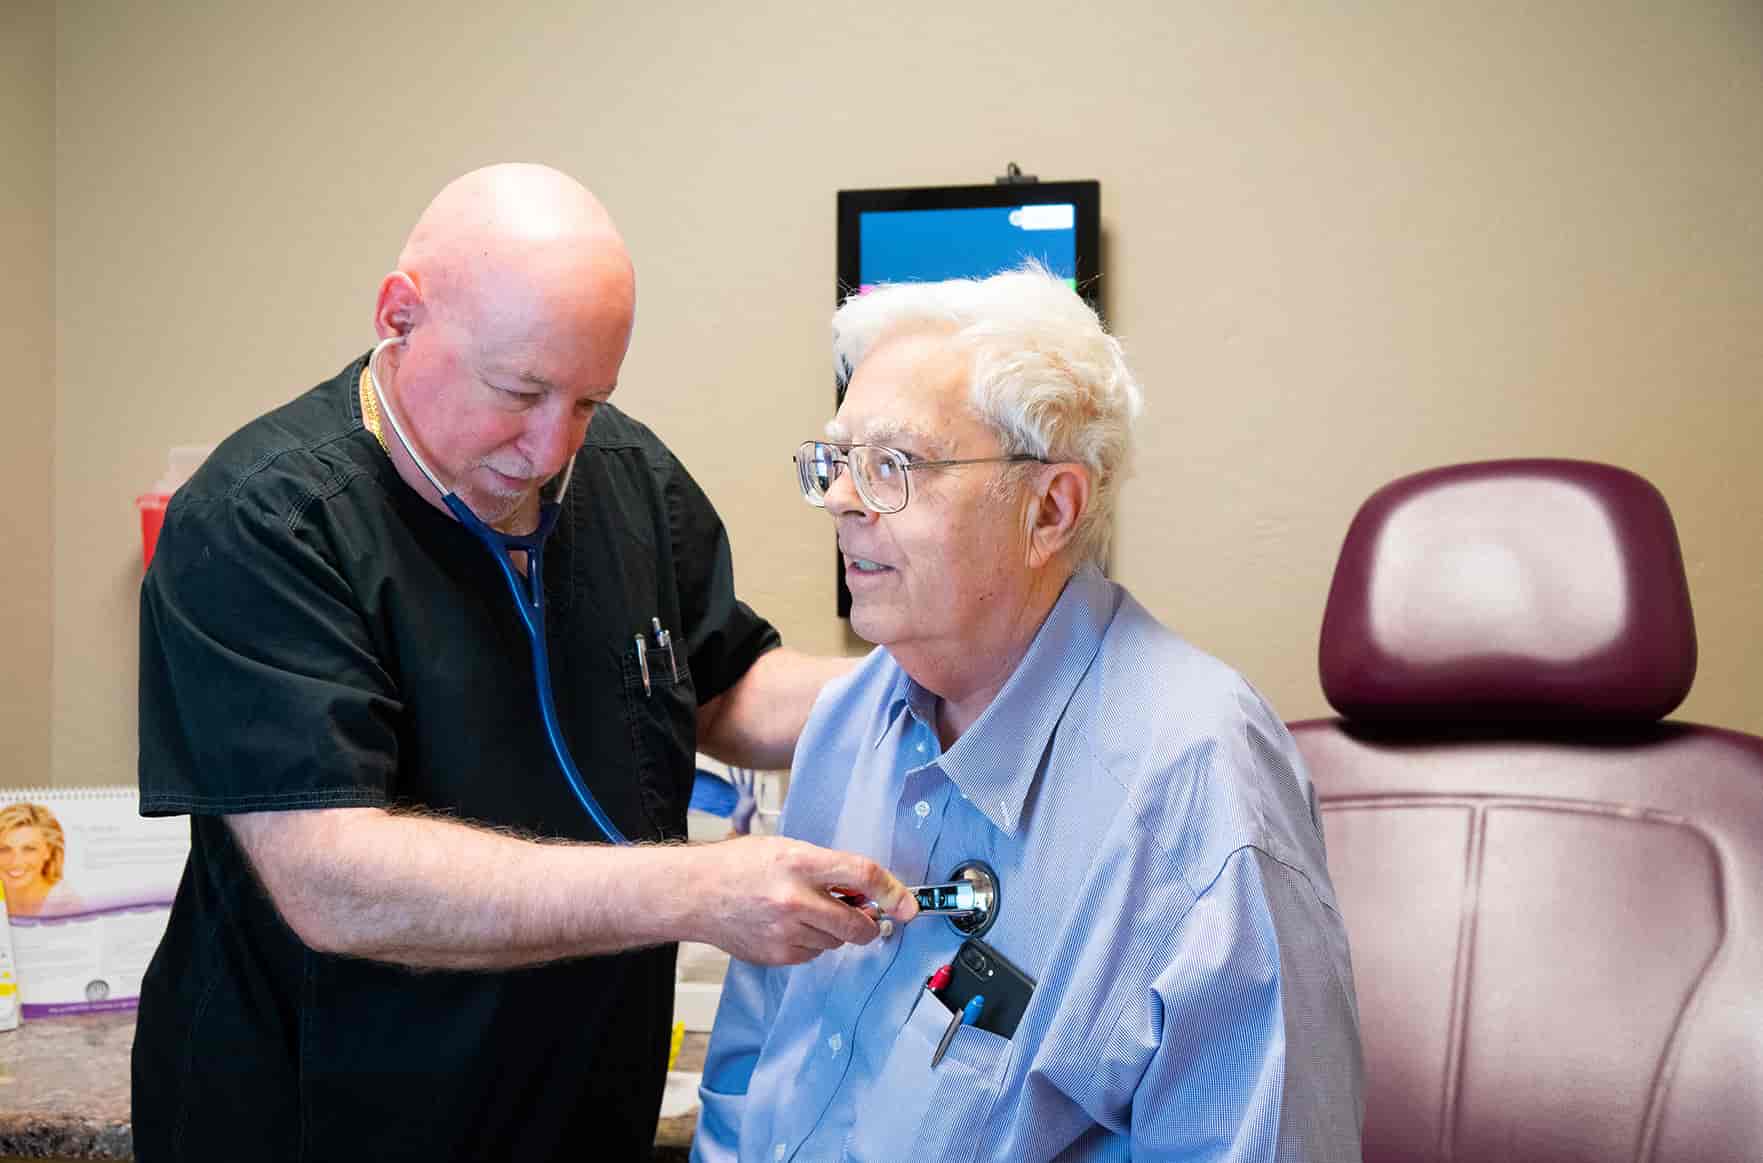 doctor checking patient heartbeat